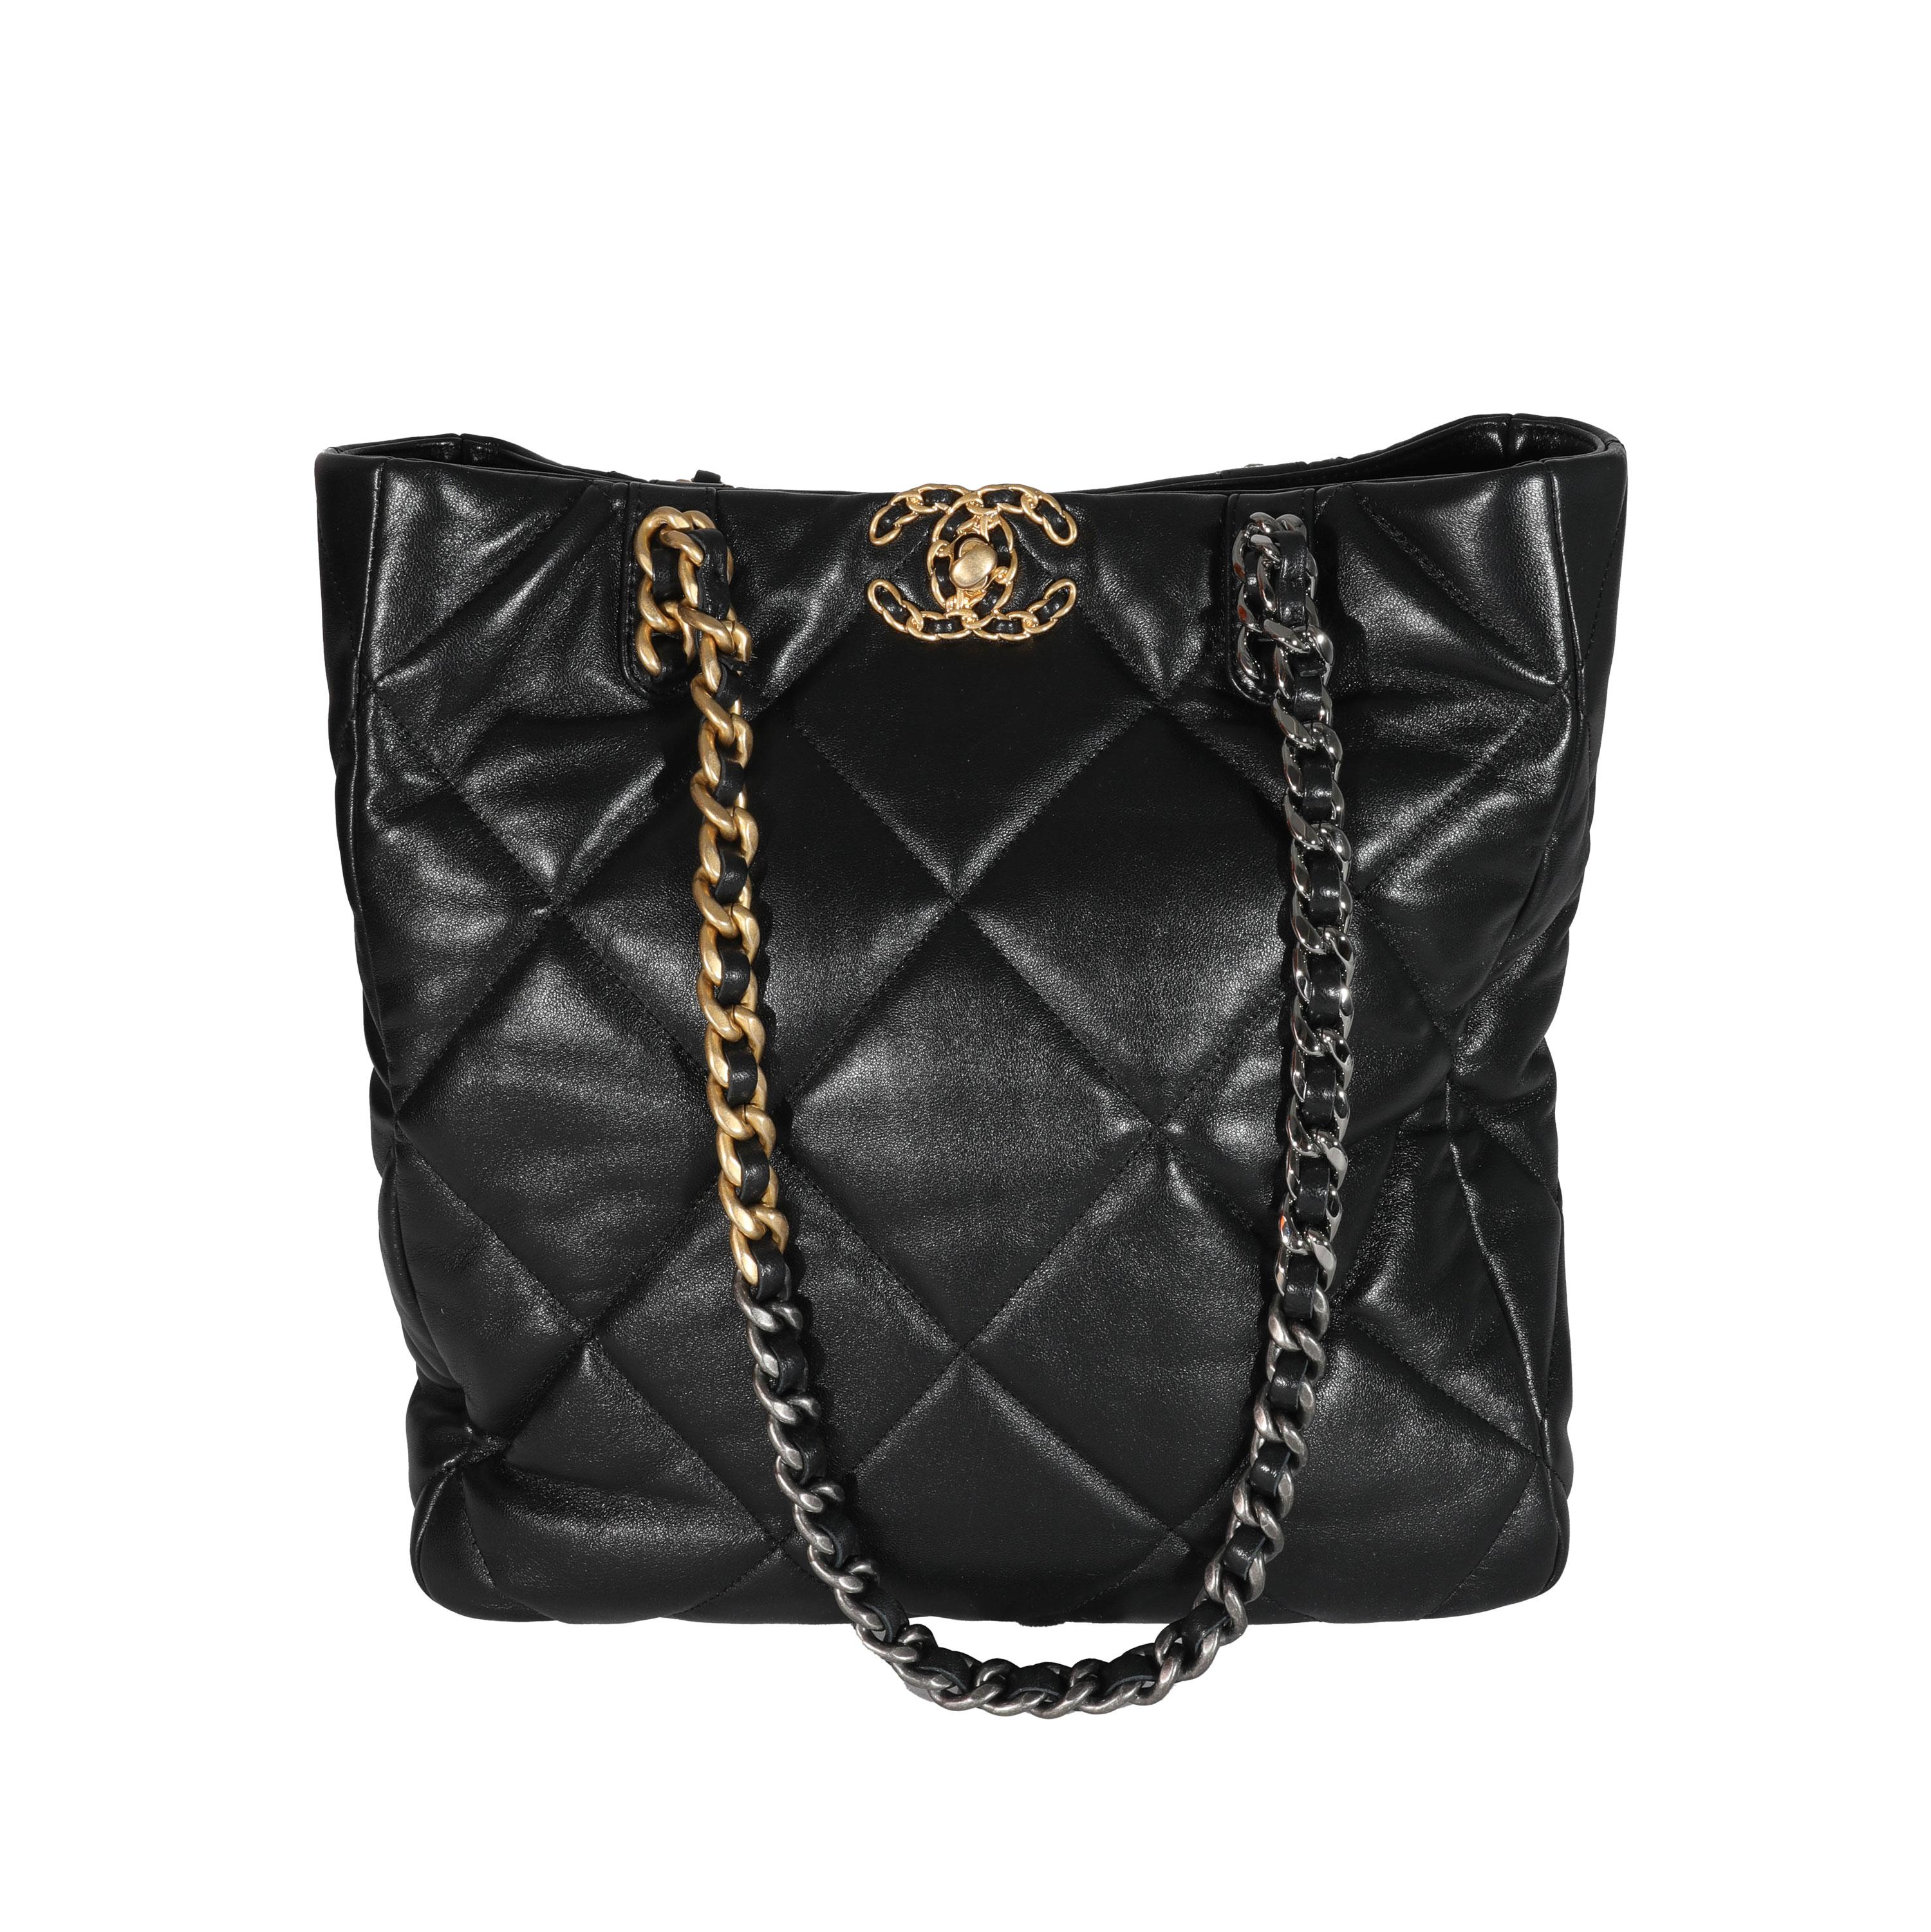 Chanel Black Lambskin Quilted Chanel 19 Shopping Bag 2